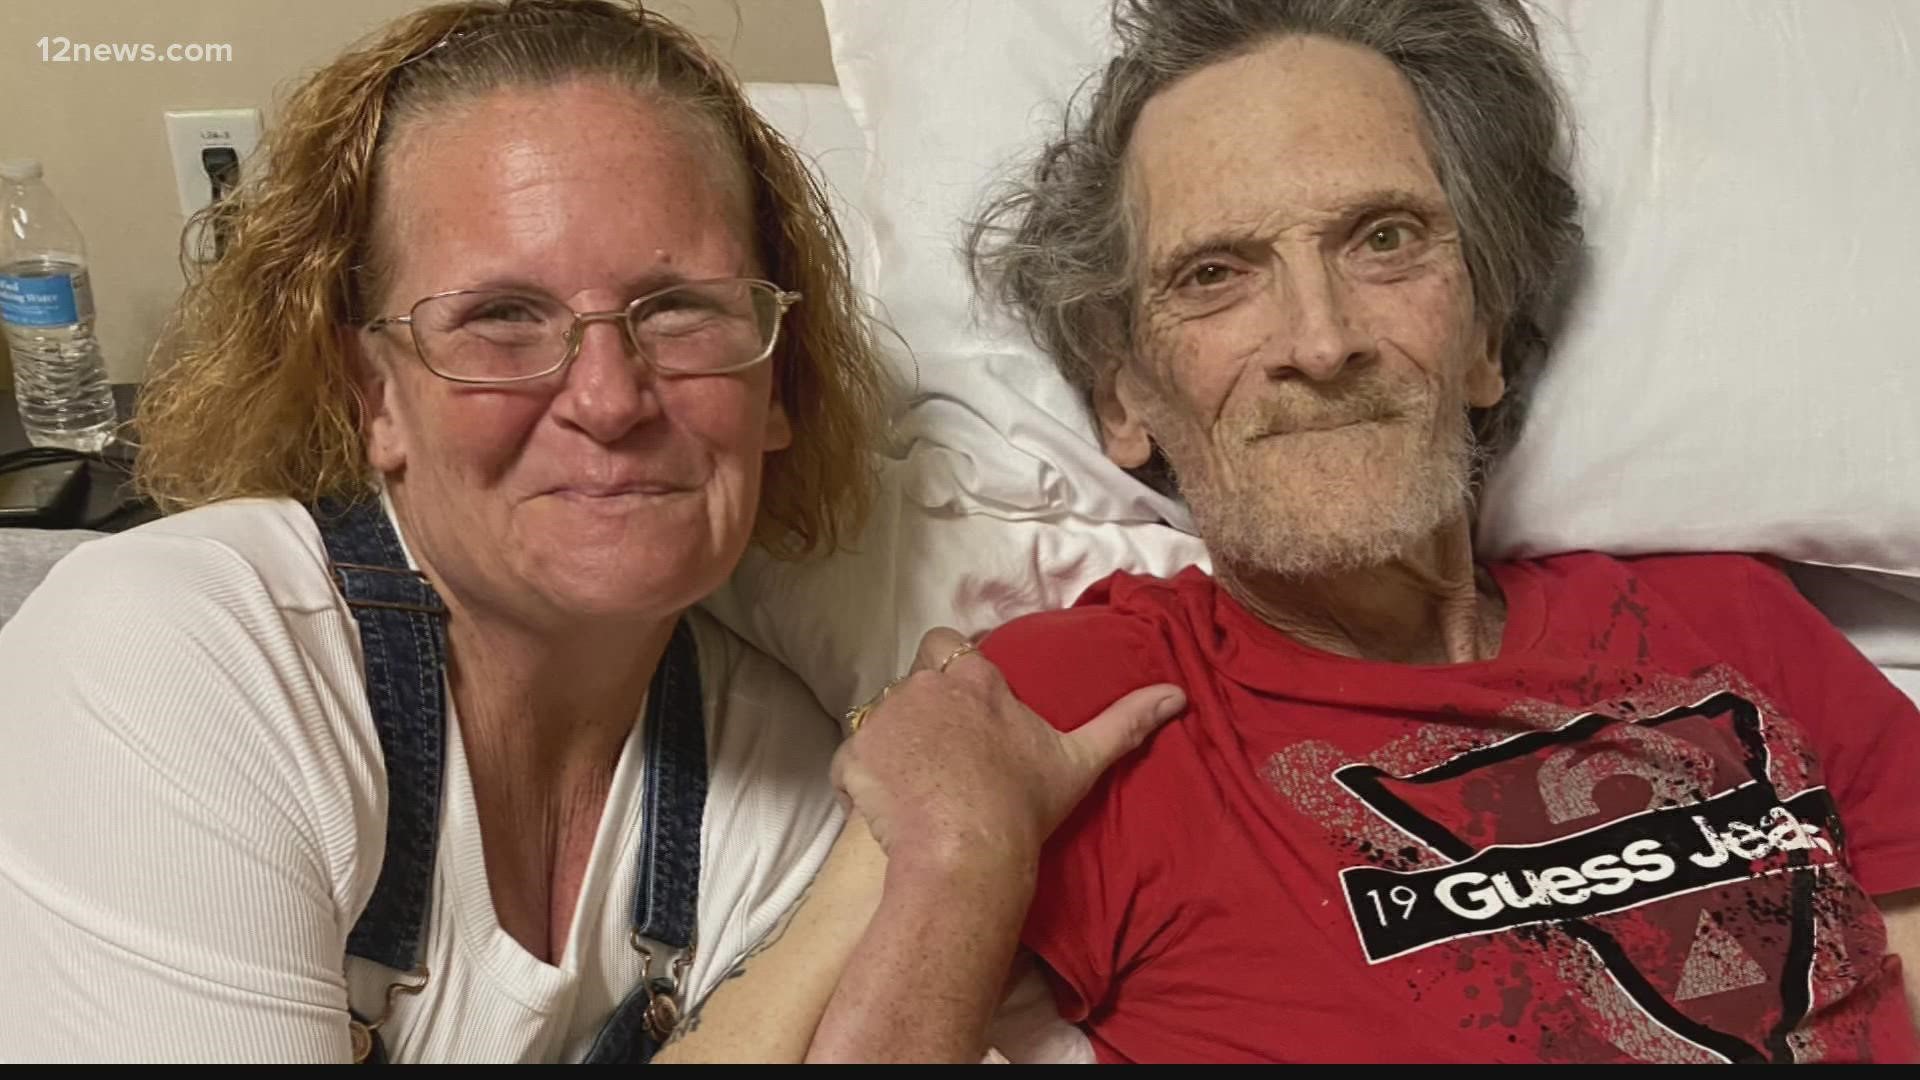 Sydney Babbit is running out of time. After being diagnosed with cancer, his only wish was to see his daughter again after being disconnected for 42 years.